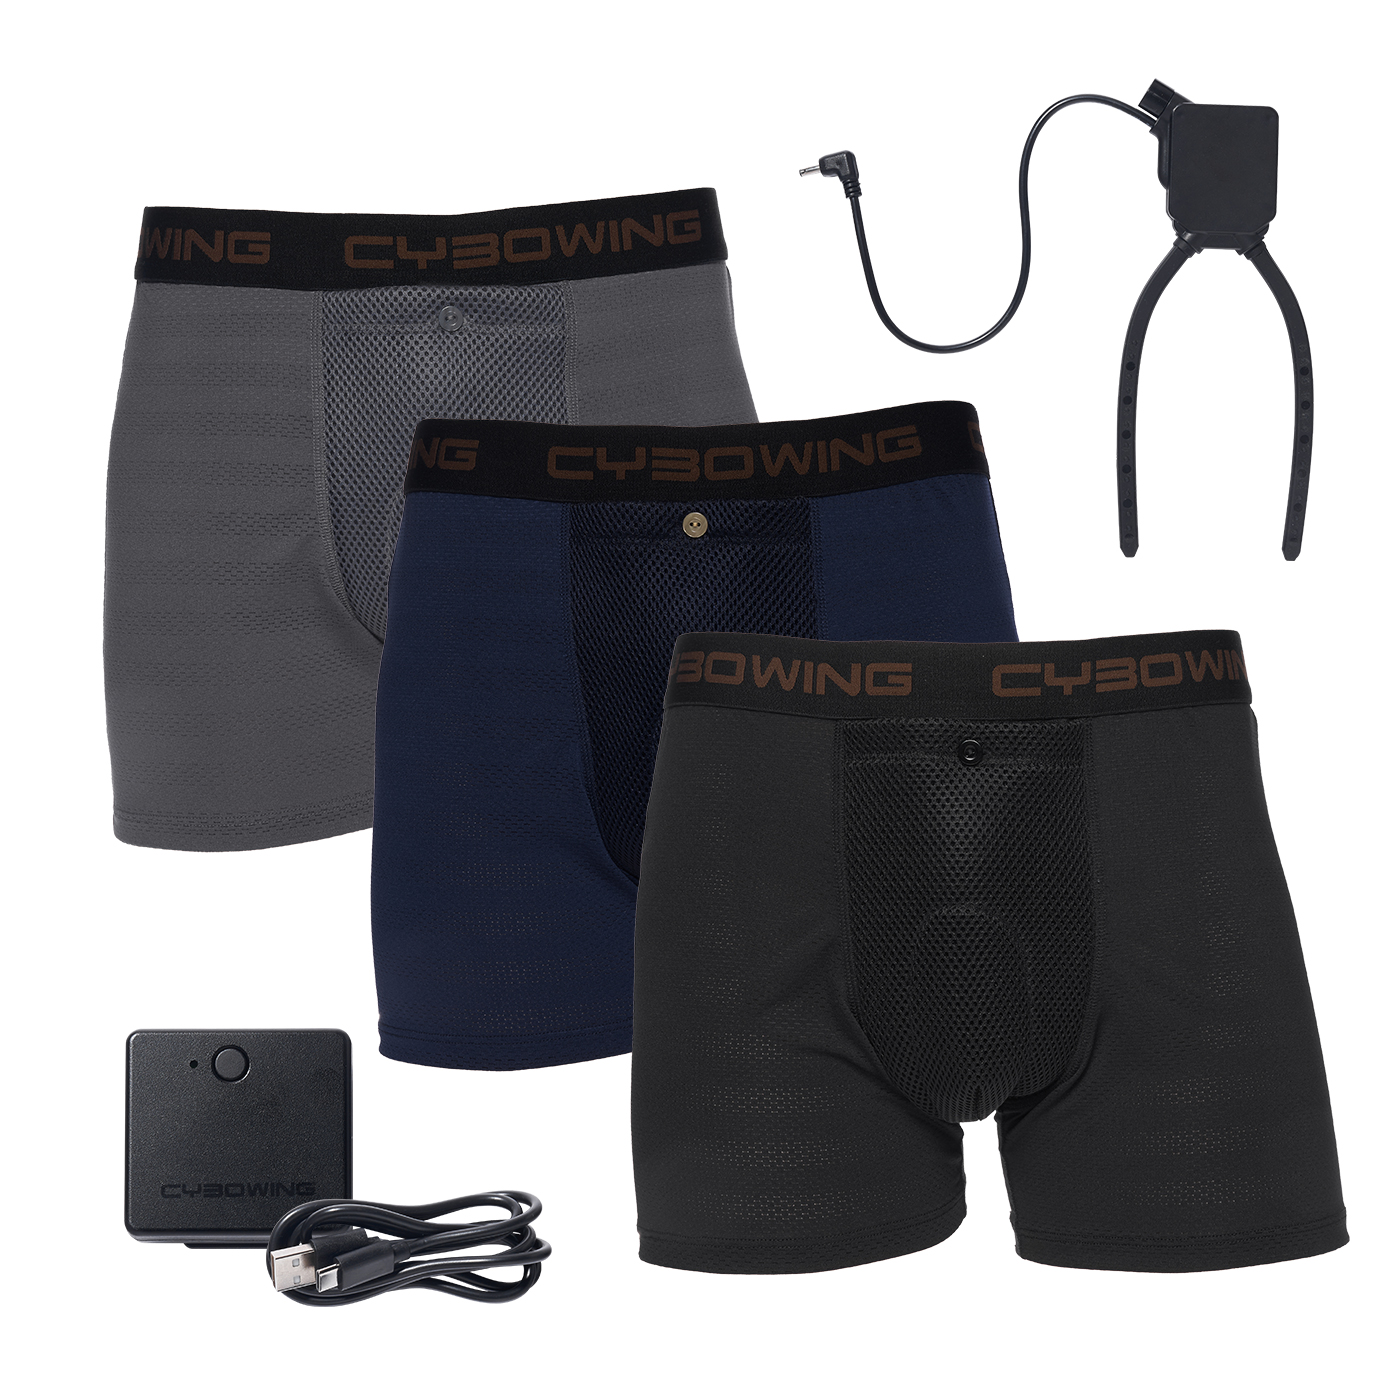 CYBOWING Men's Cooling Underwear 3 Pack With Cooling Device